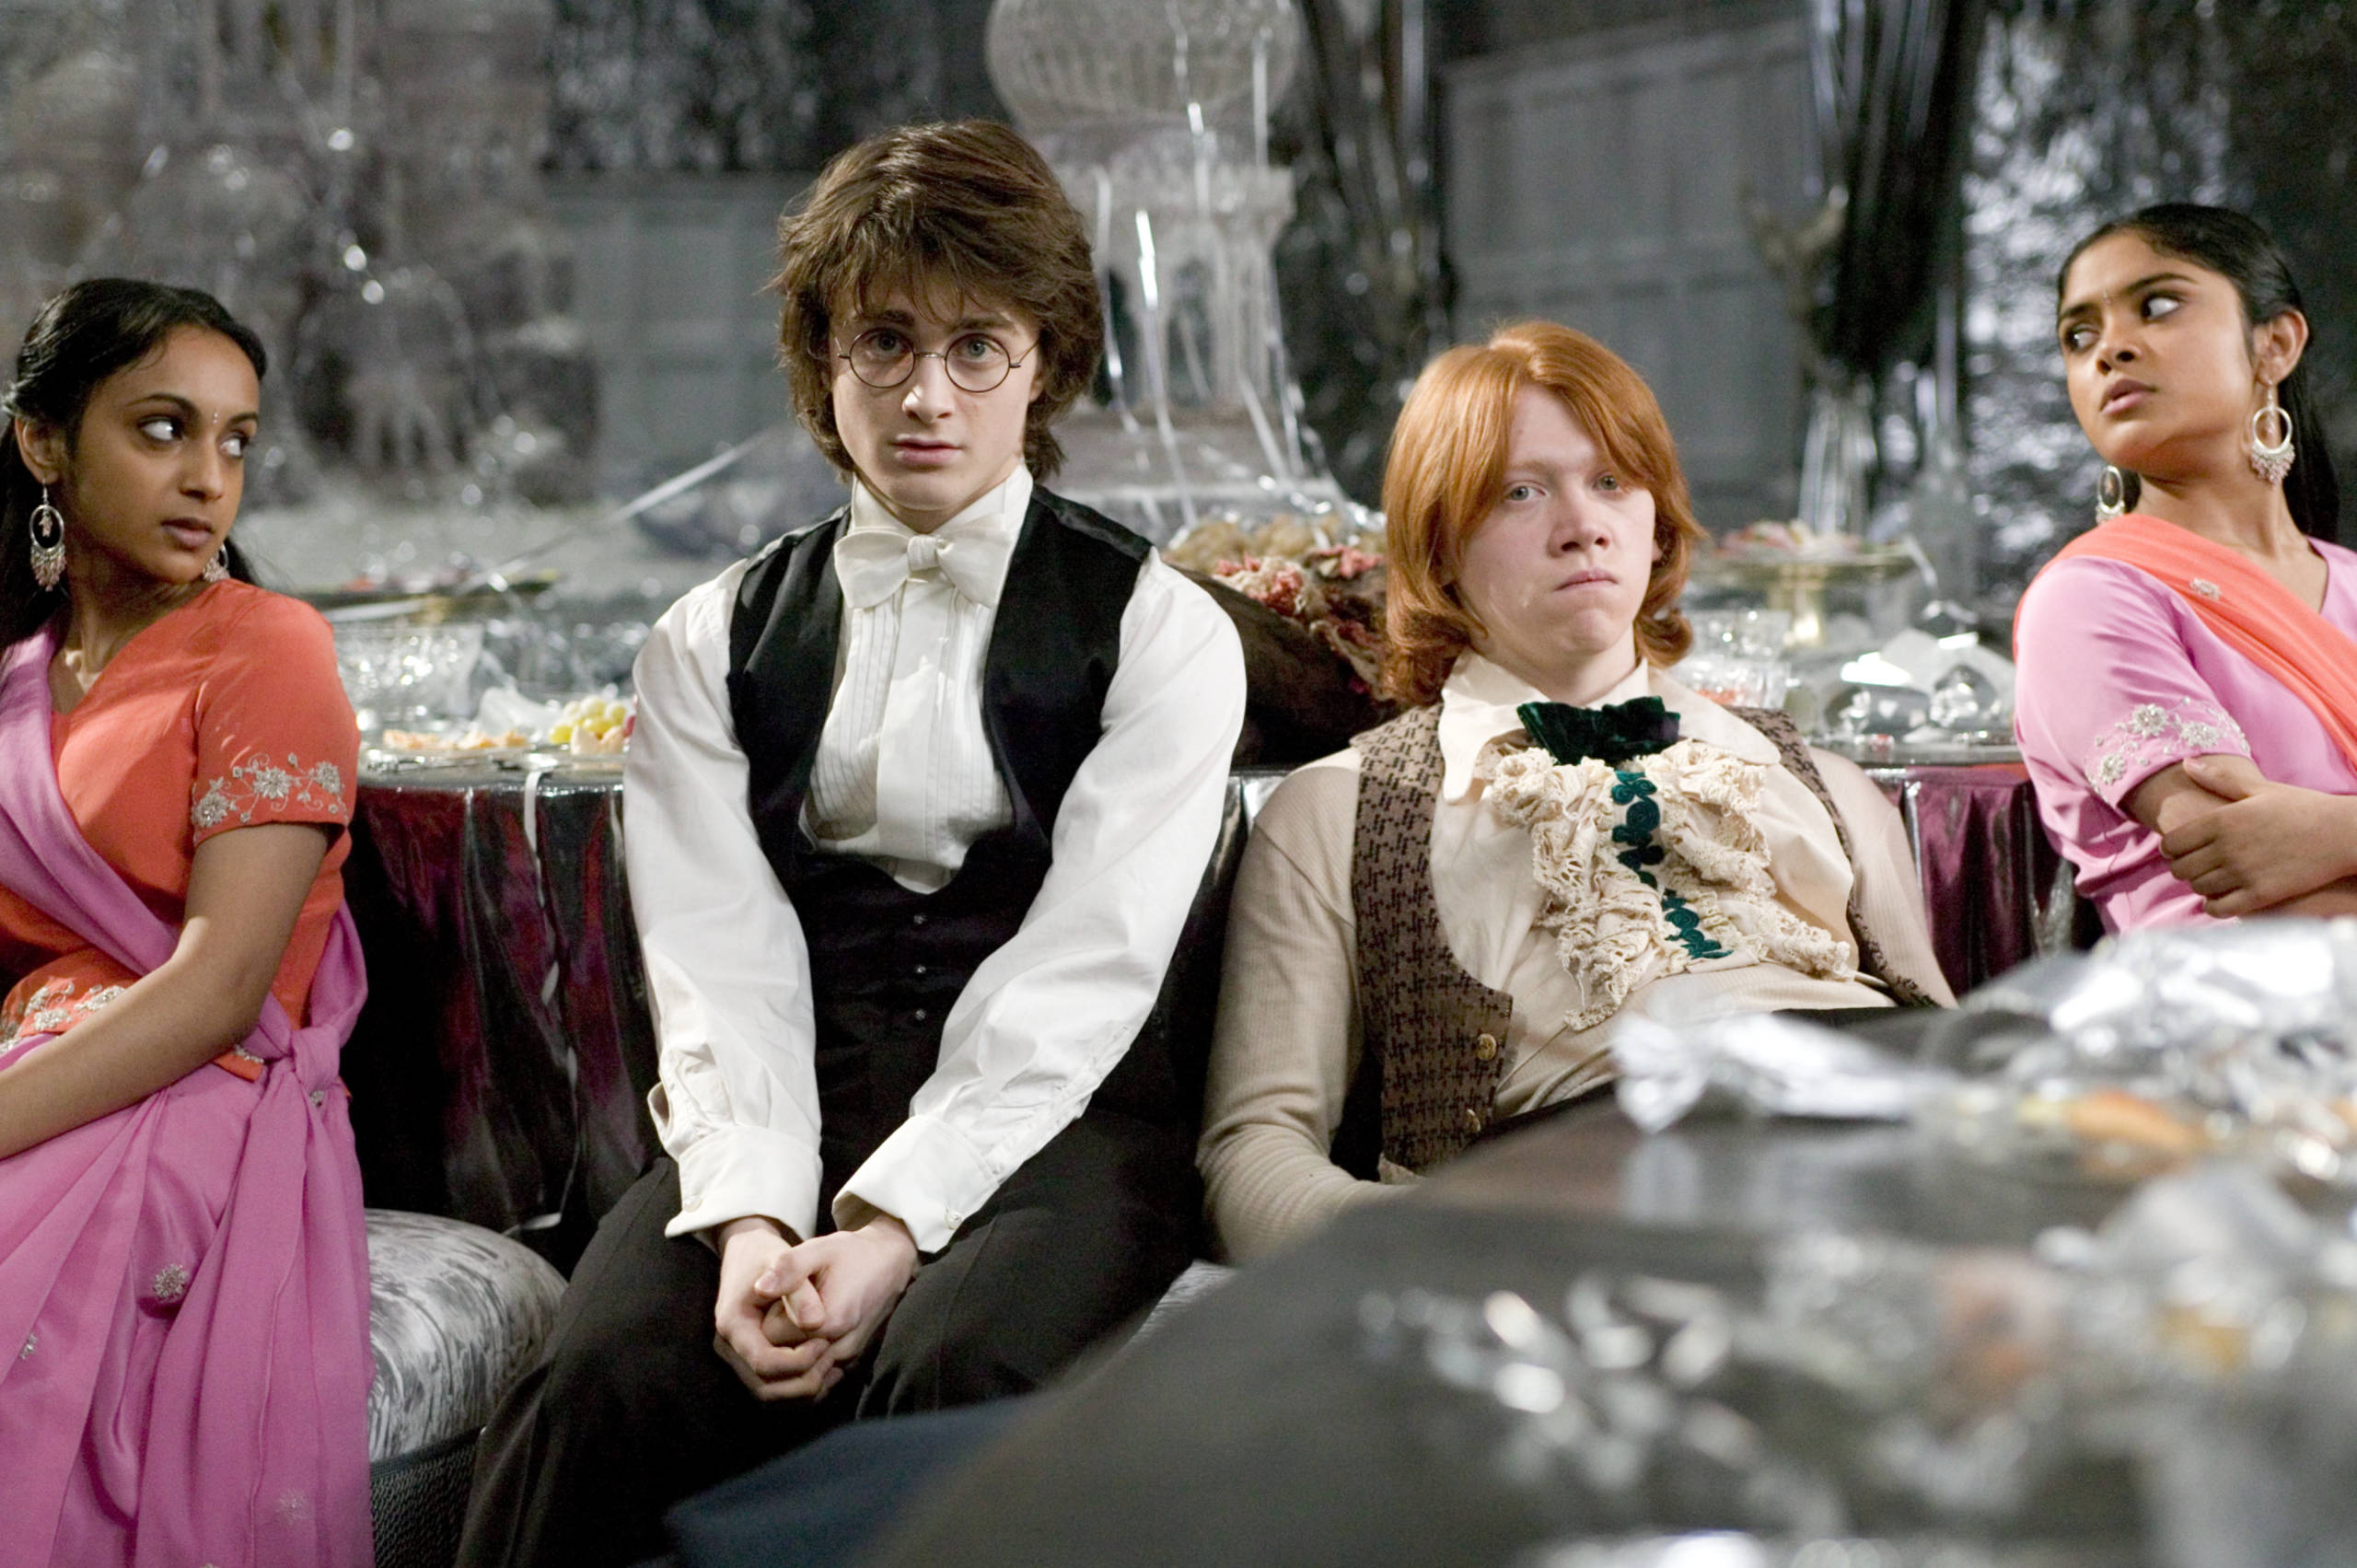 Which Character In Harry Potter Has The Best Fashion Sense?